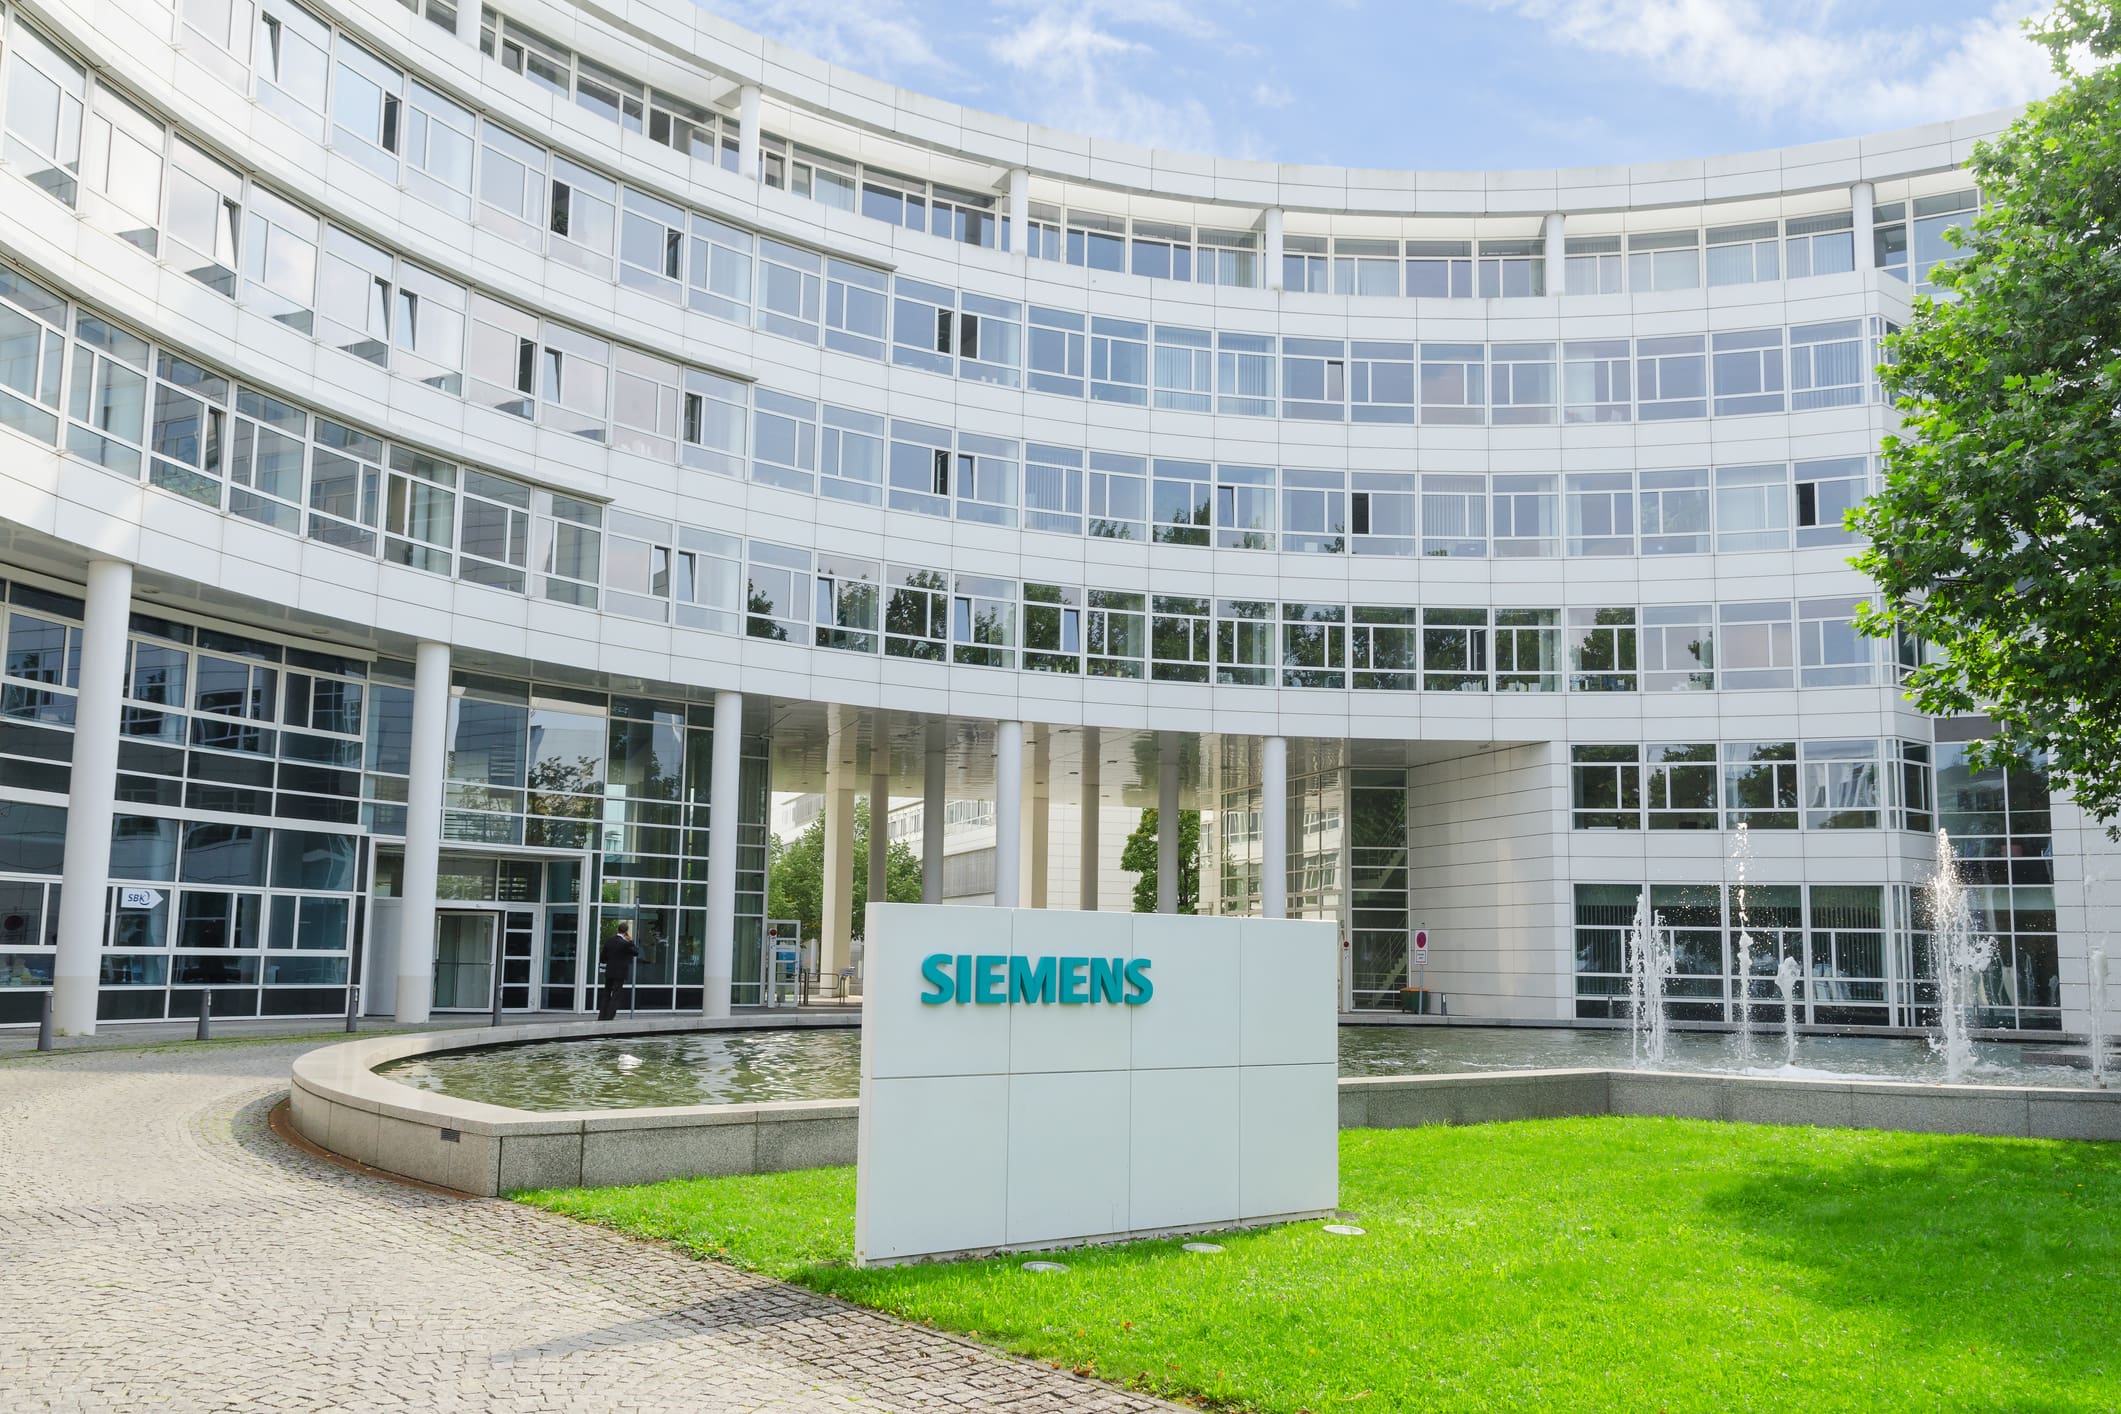 New Siemens AG scientific research and production complex